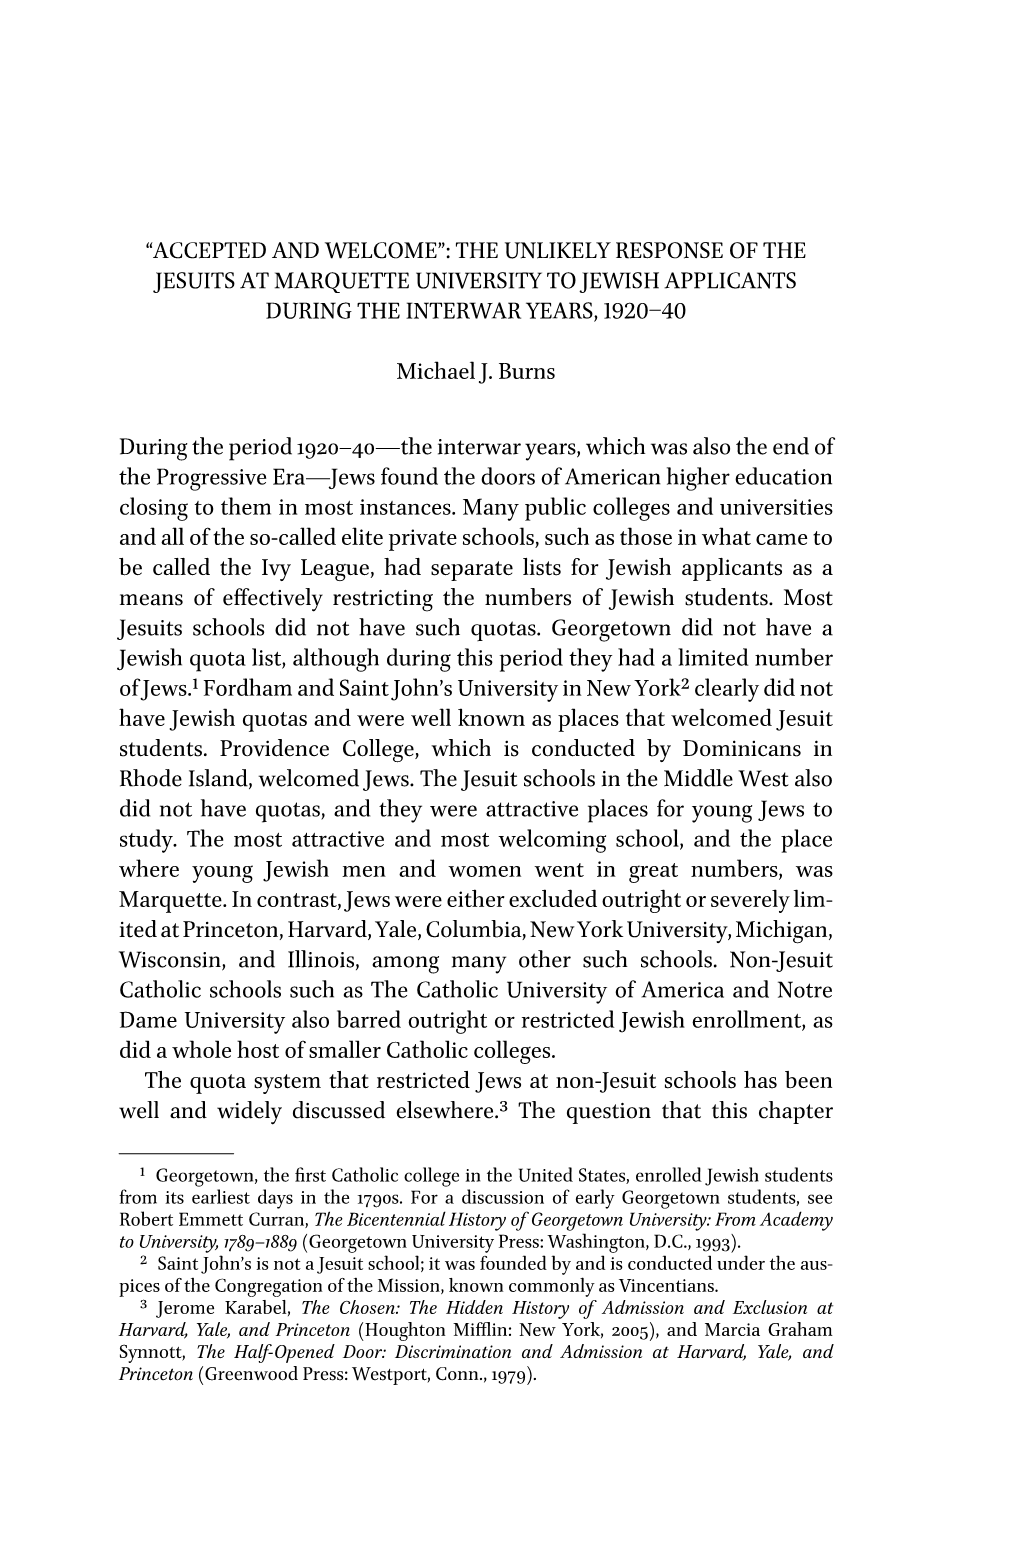 “Accepted and Welcome”: the Unlikely Response of the Jesuits at Marquette University to Jewish Applicants During the Interwar Years, 1920–40